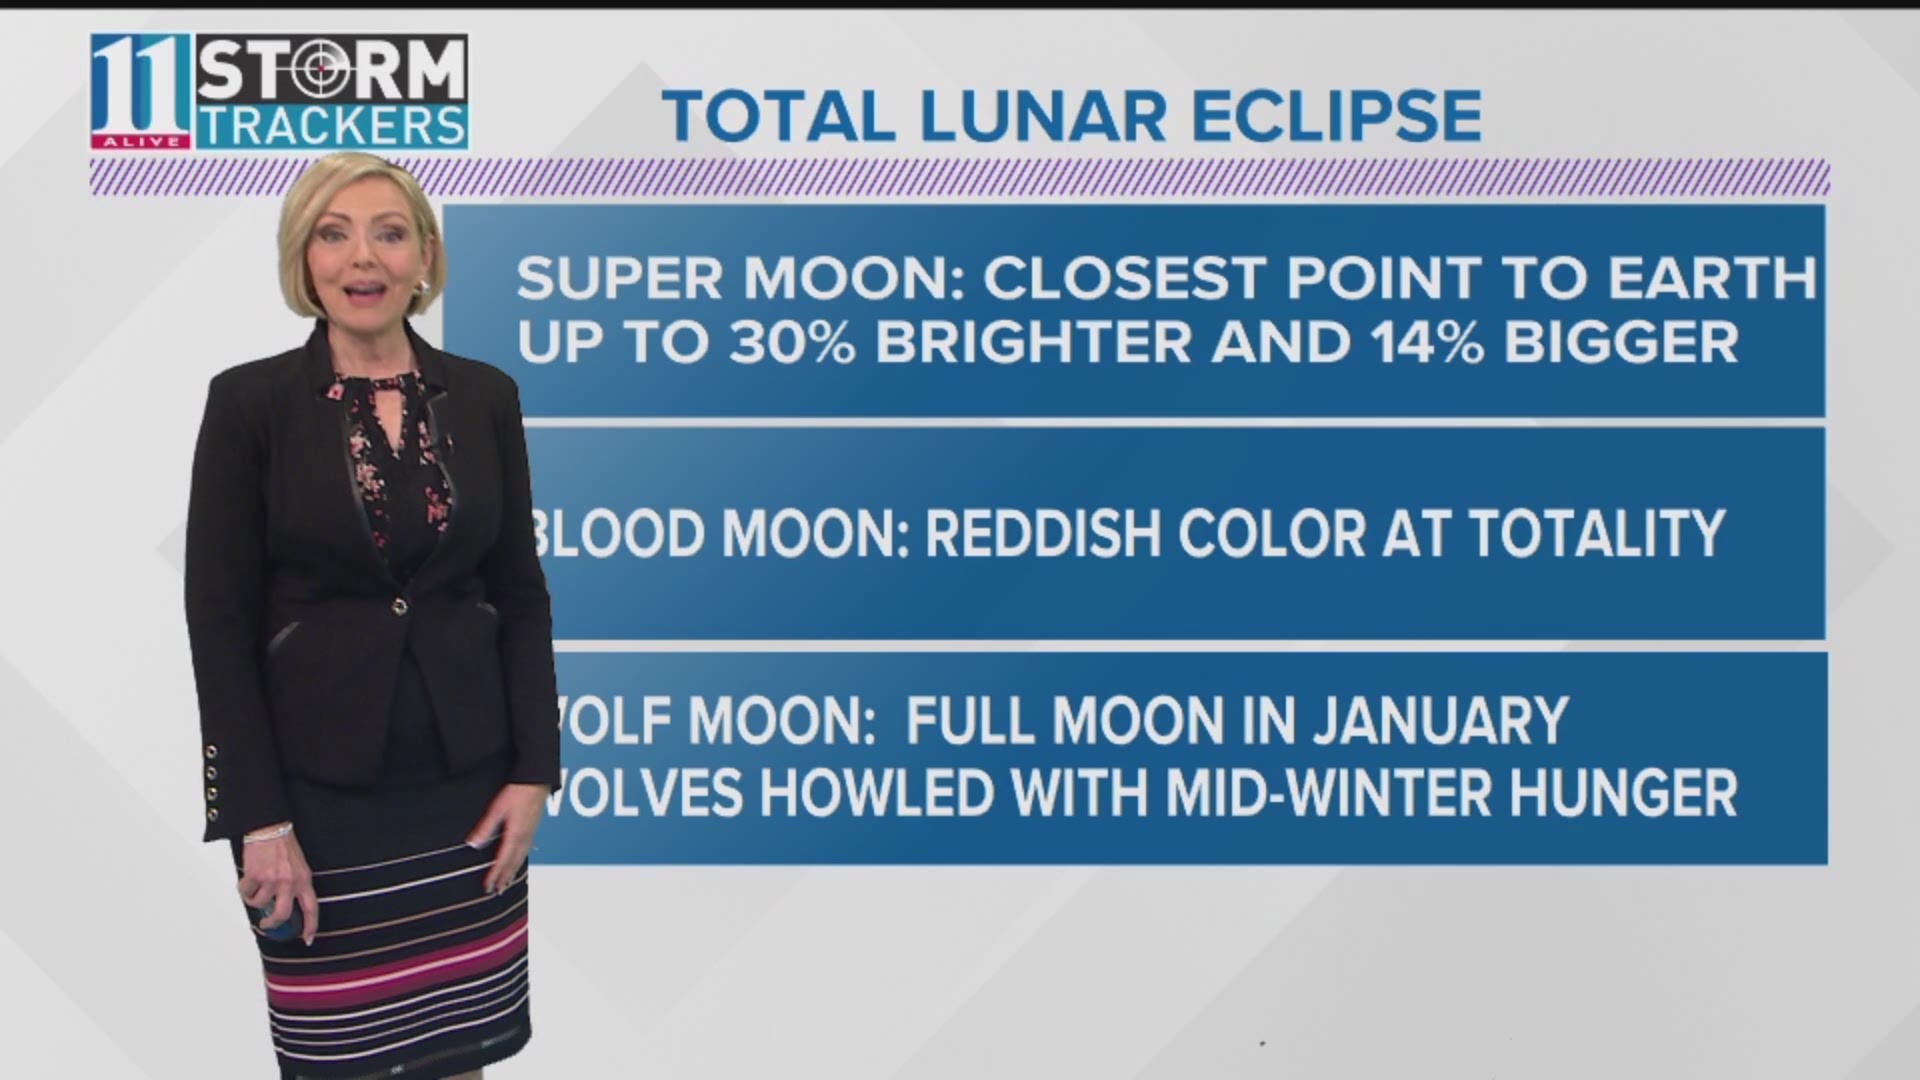 Starting on Sunday, Jan. 20, a total lunar eclipse, or blood moon, that coincides with a supermoon will be visible over the entire United States.